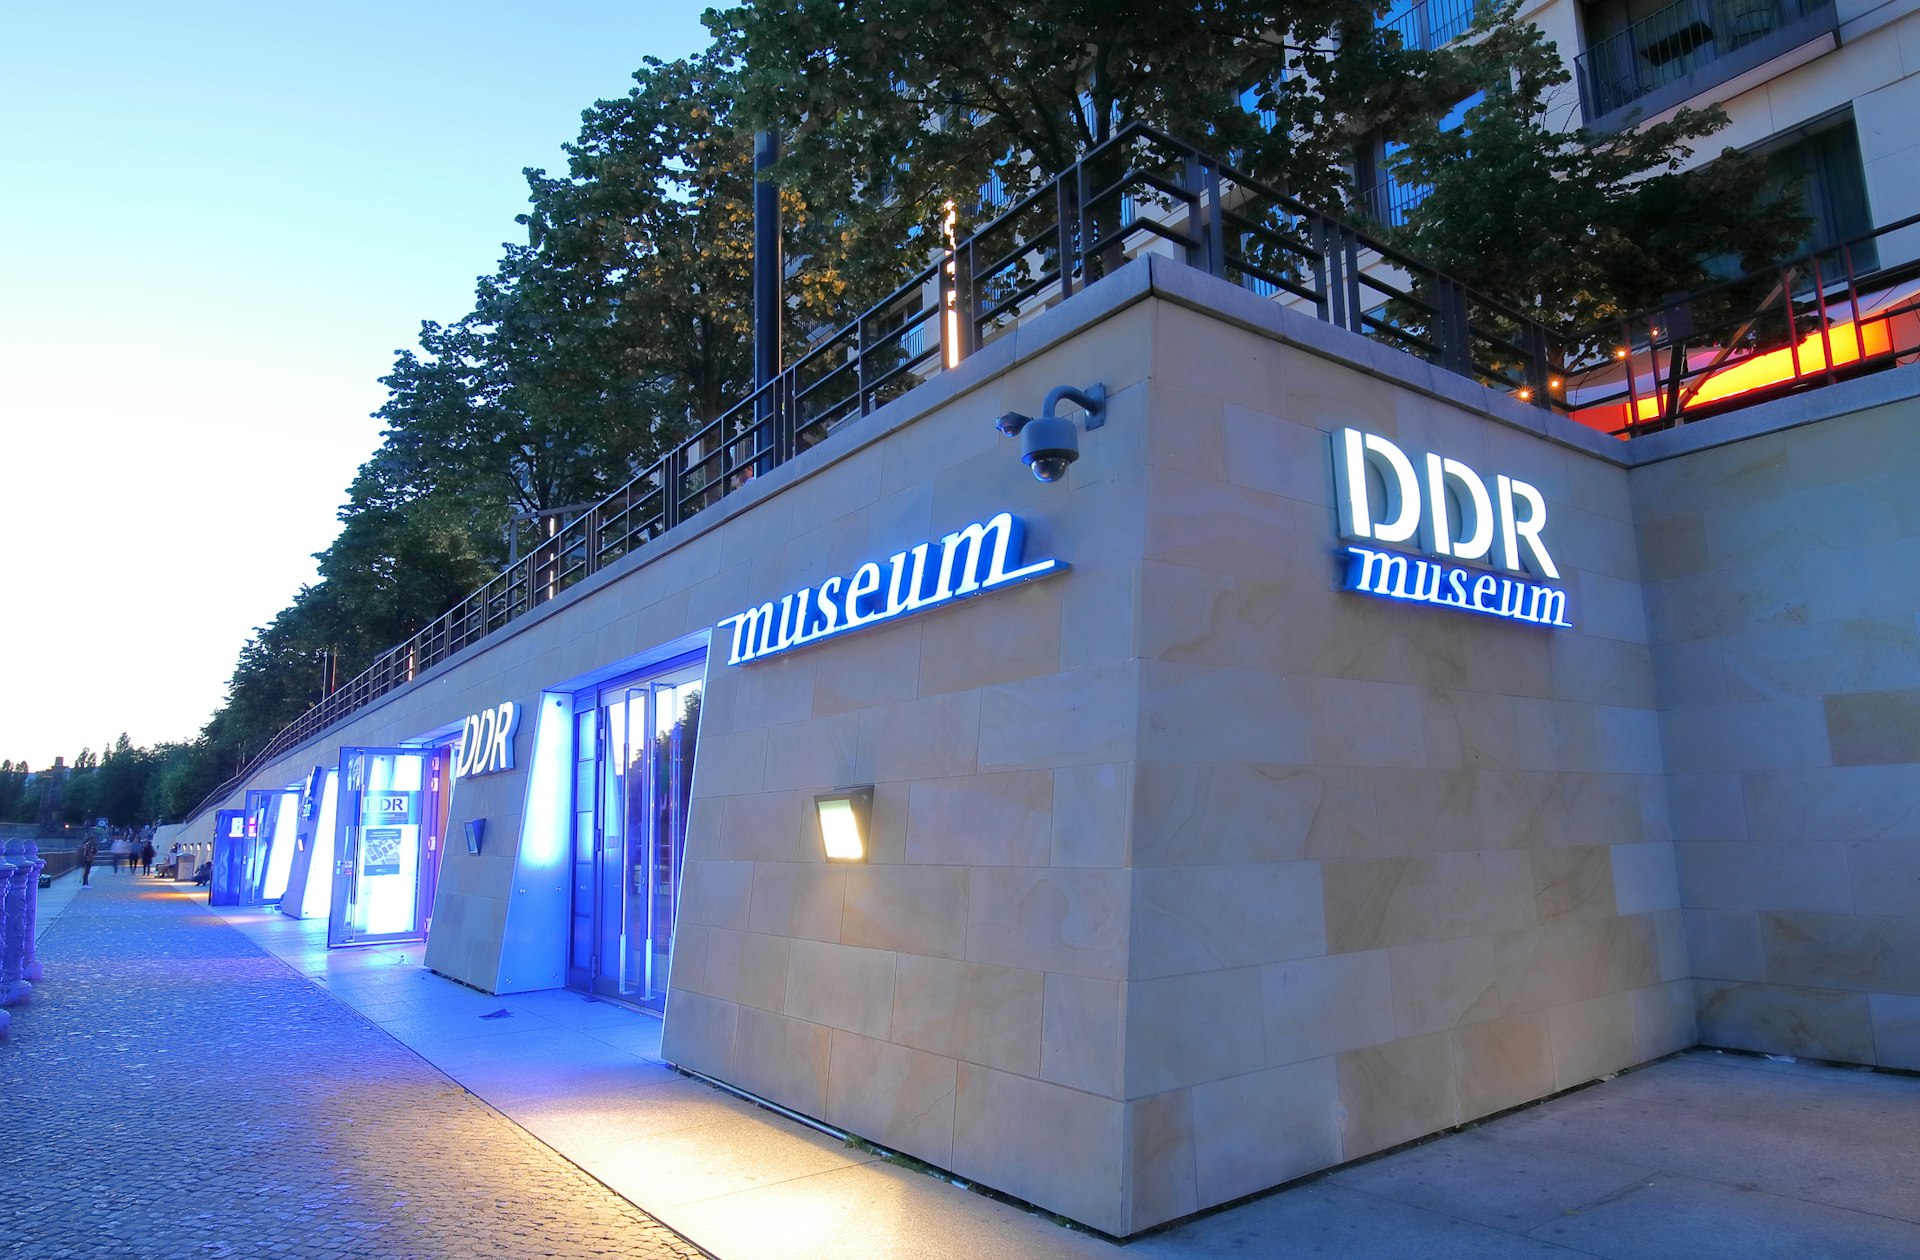 The exterior of the DDR Museum in Berlin, lit up with blue lights at night 